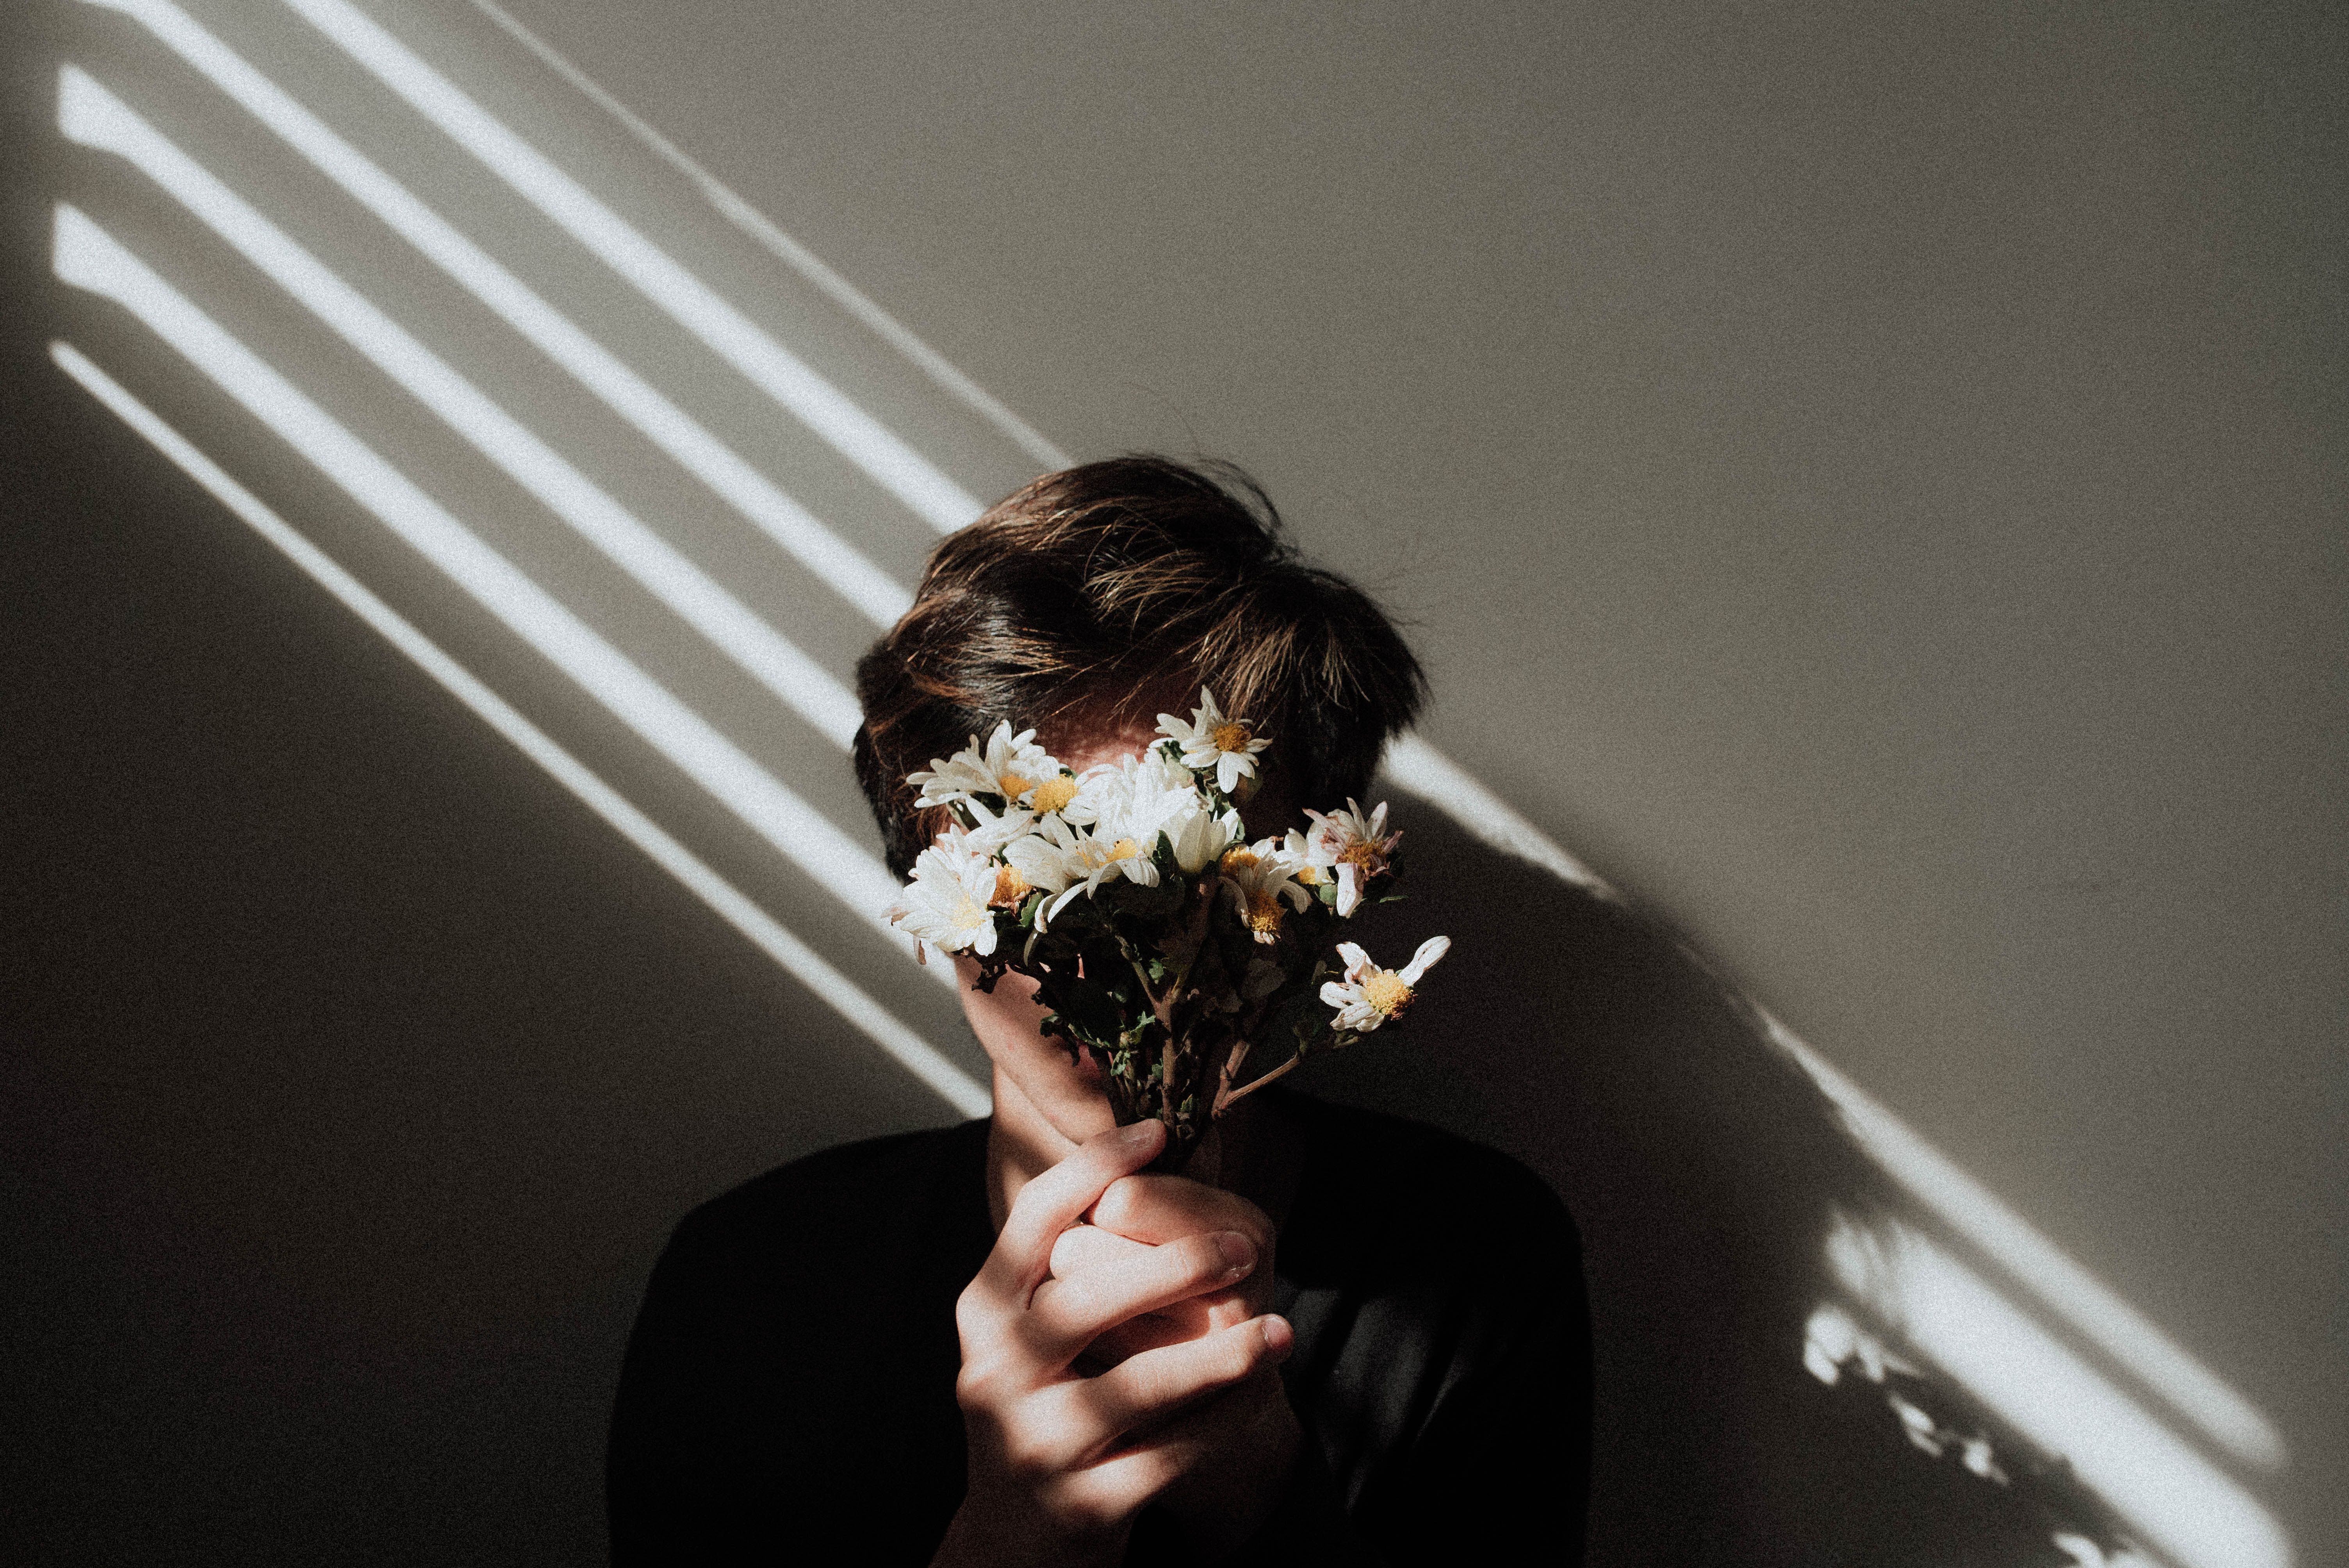 6016x4016 bloom, flower, man, person, indoor, hold, floral, light, boy, vintage, bunch, tumblr, shadow, grunge, aesthetic, retro, Public domain image Gallery HD Wallpaper